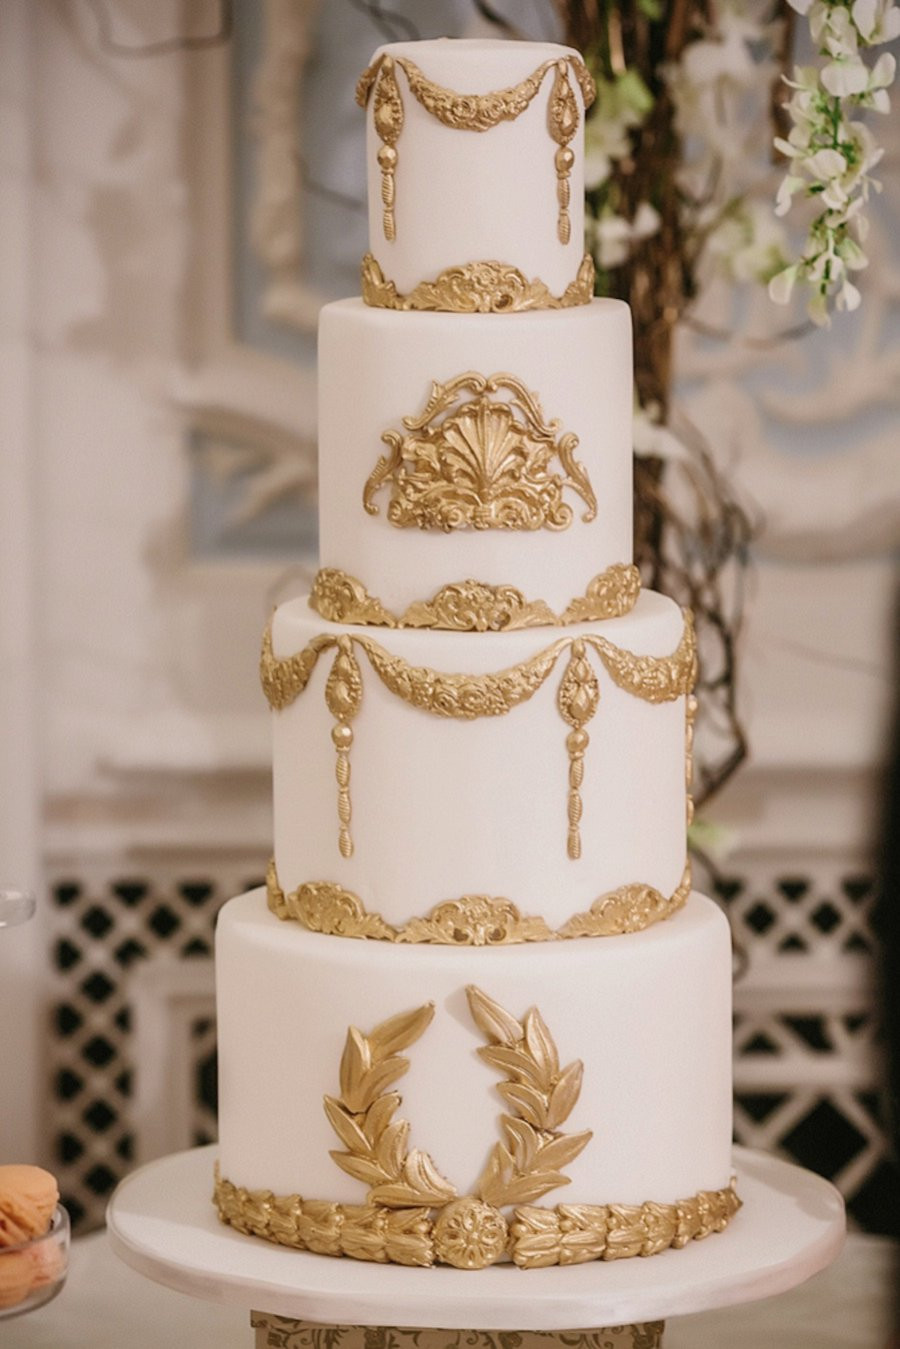 Top Wedding Cakes
 Top 10 Wedding Cake Trends for 2016